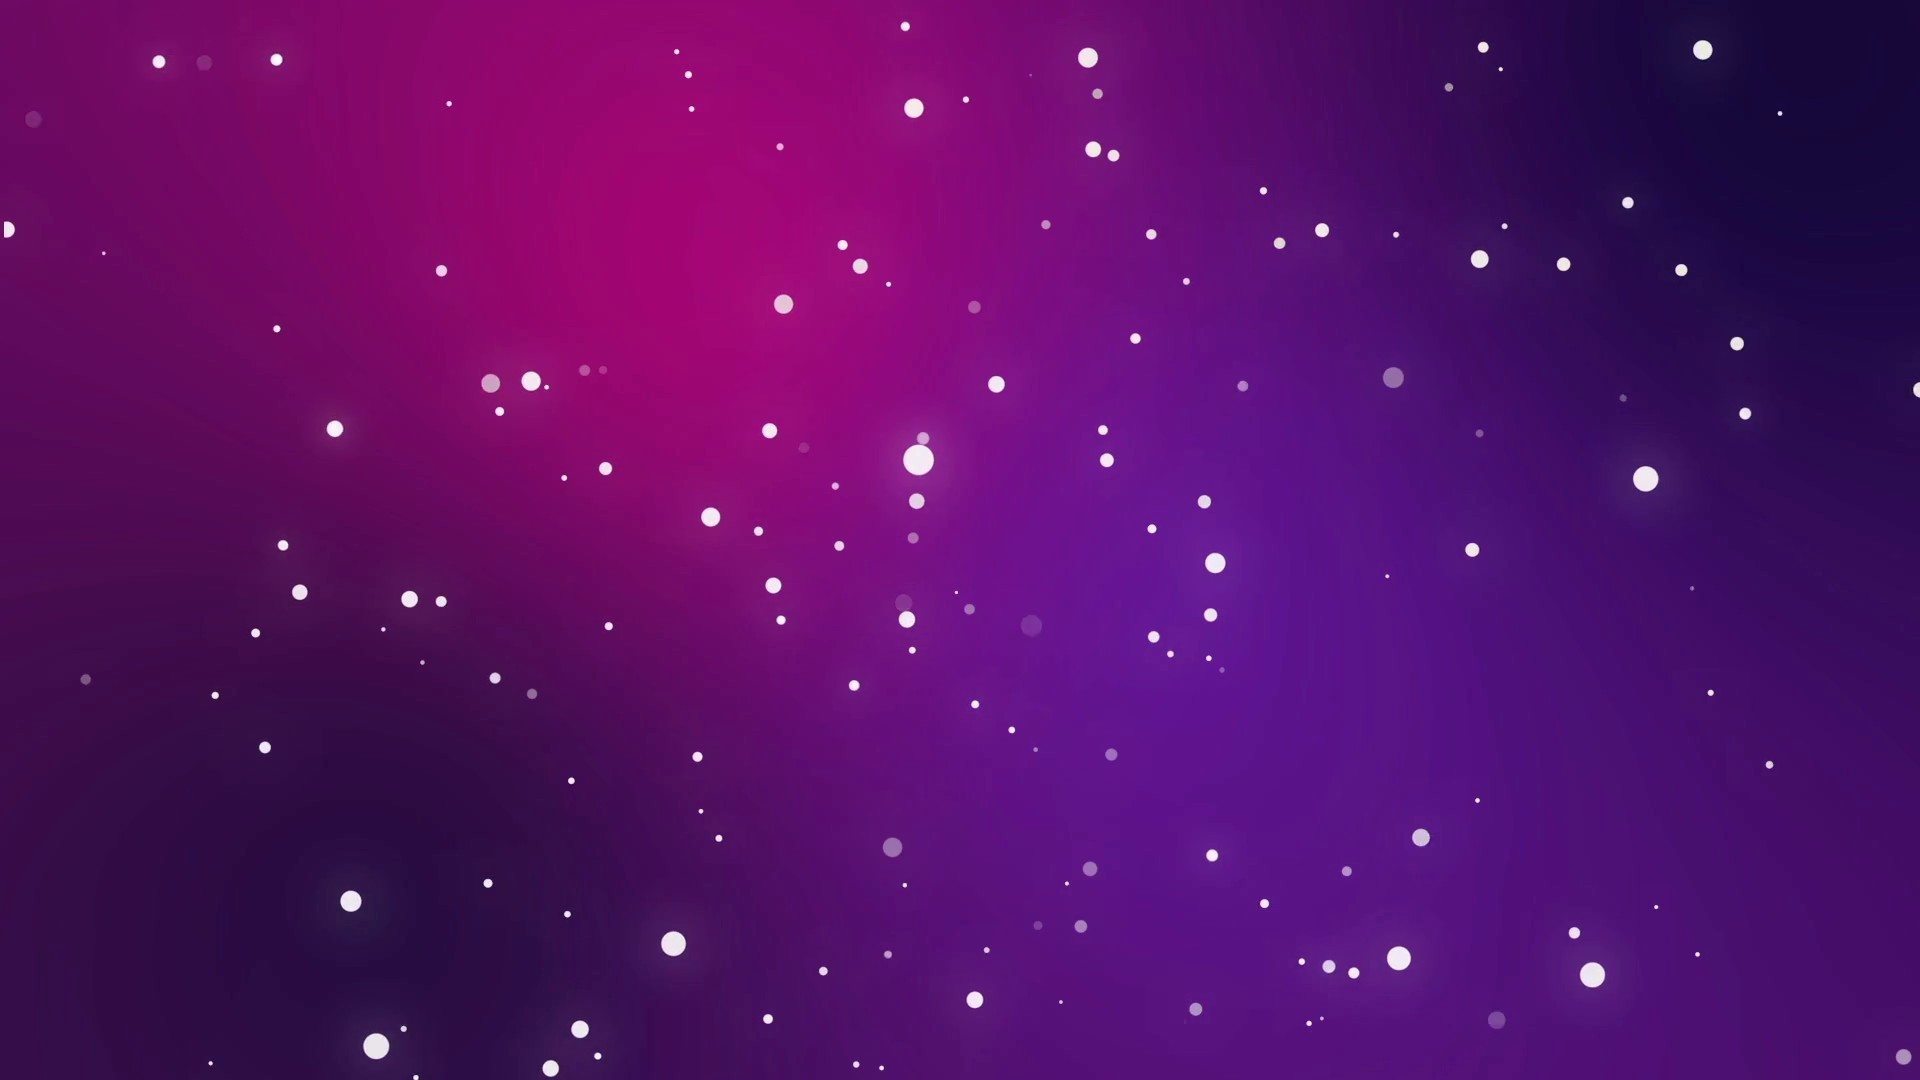 Pink and Purple Star Backgrounds (49+ pictures)